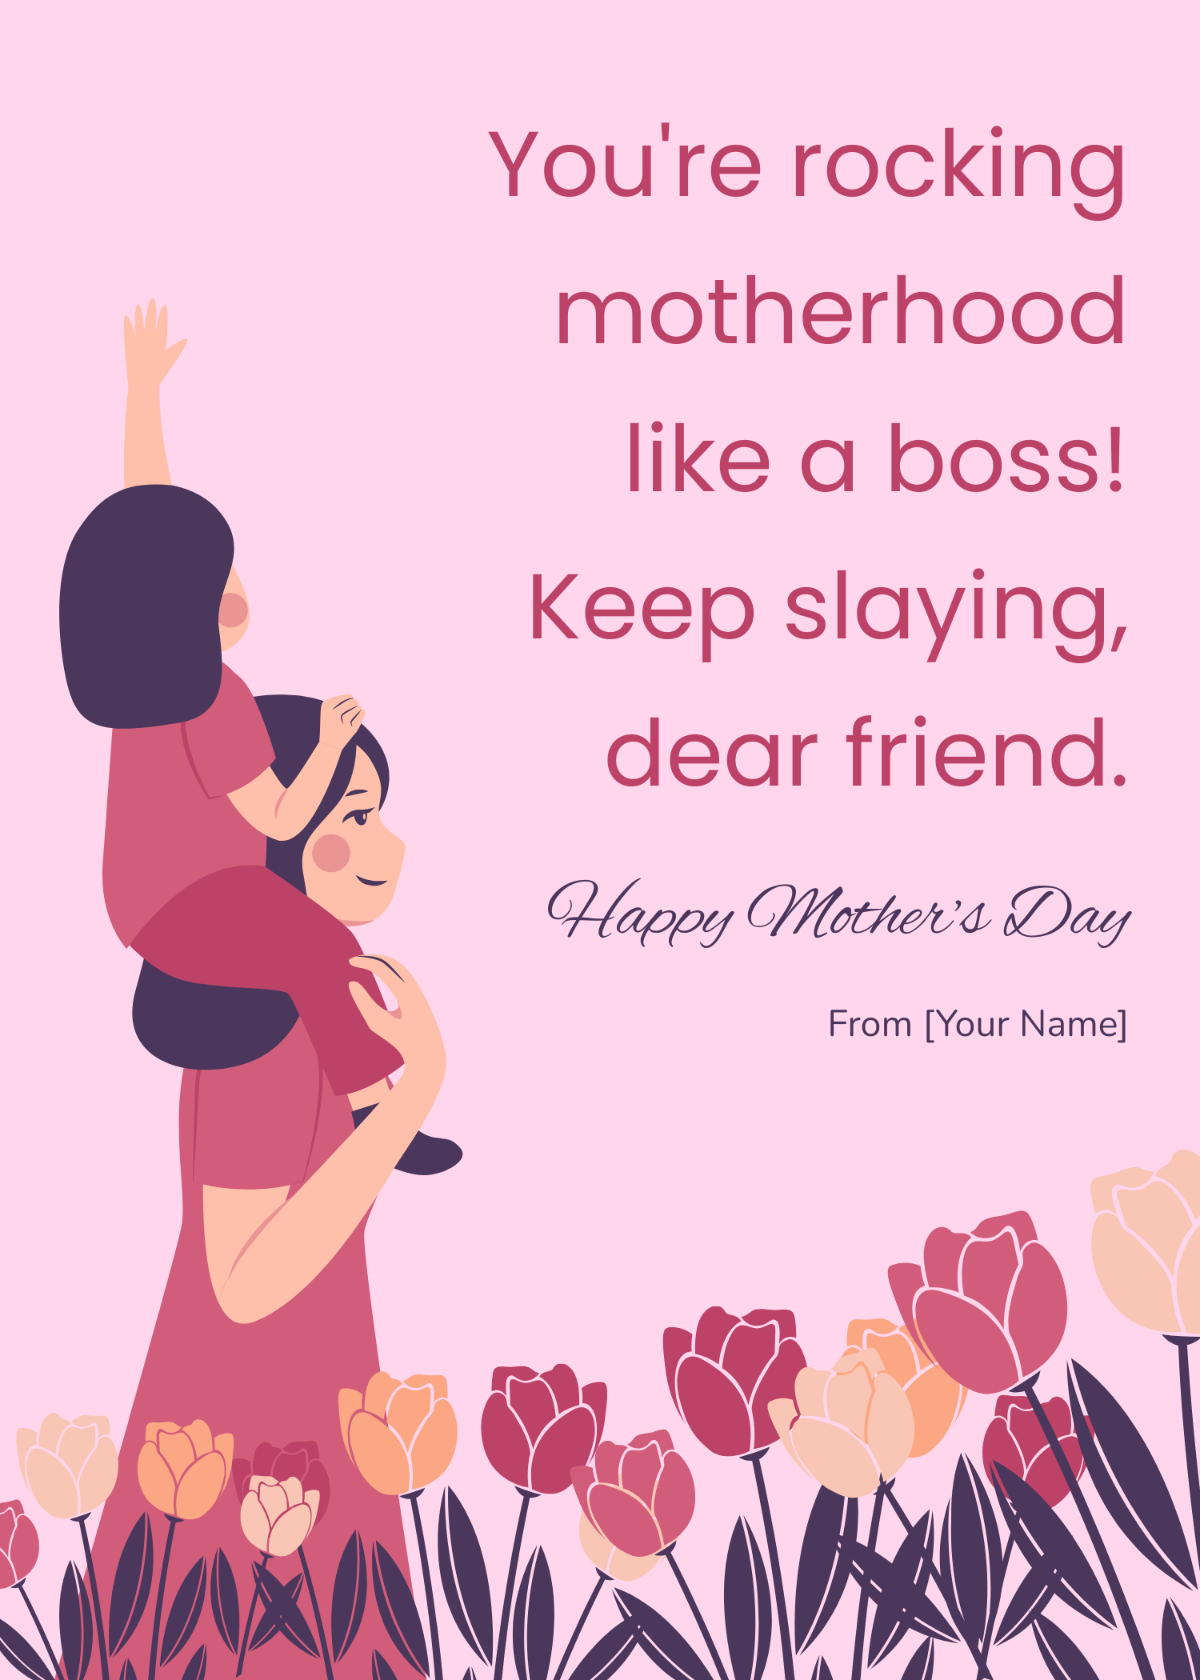 Mother's Day Message to a Friend